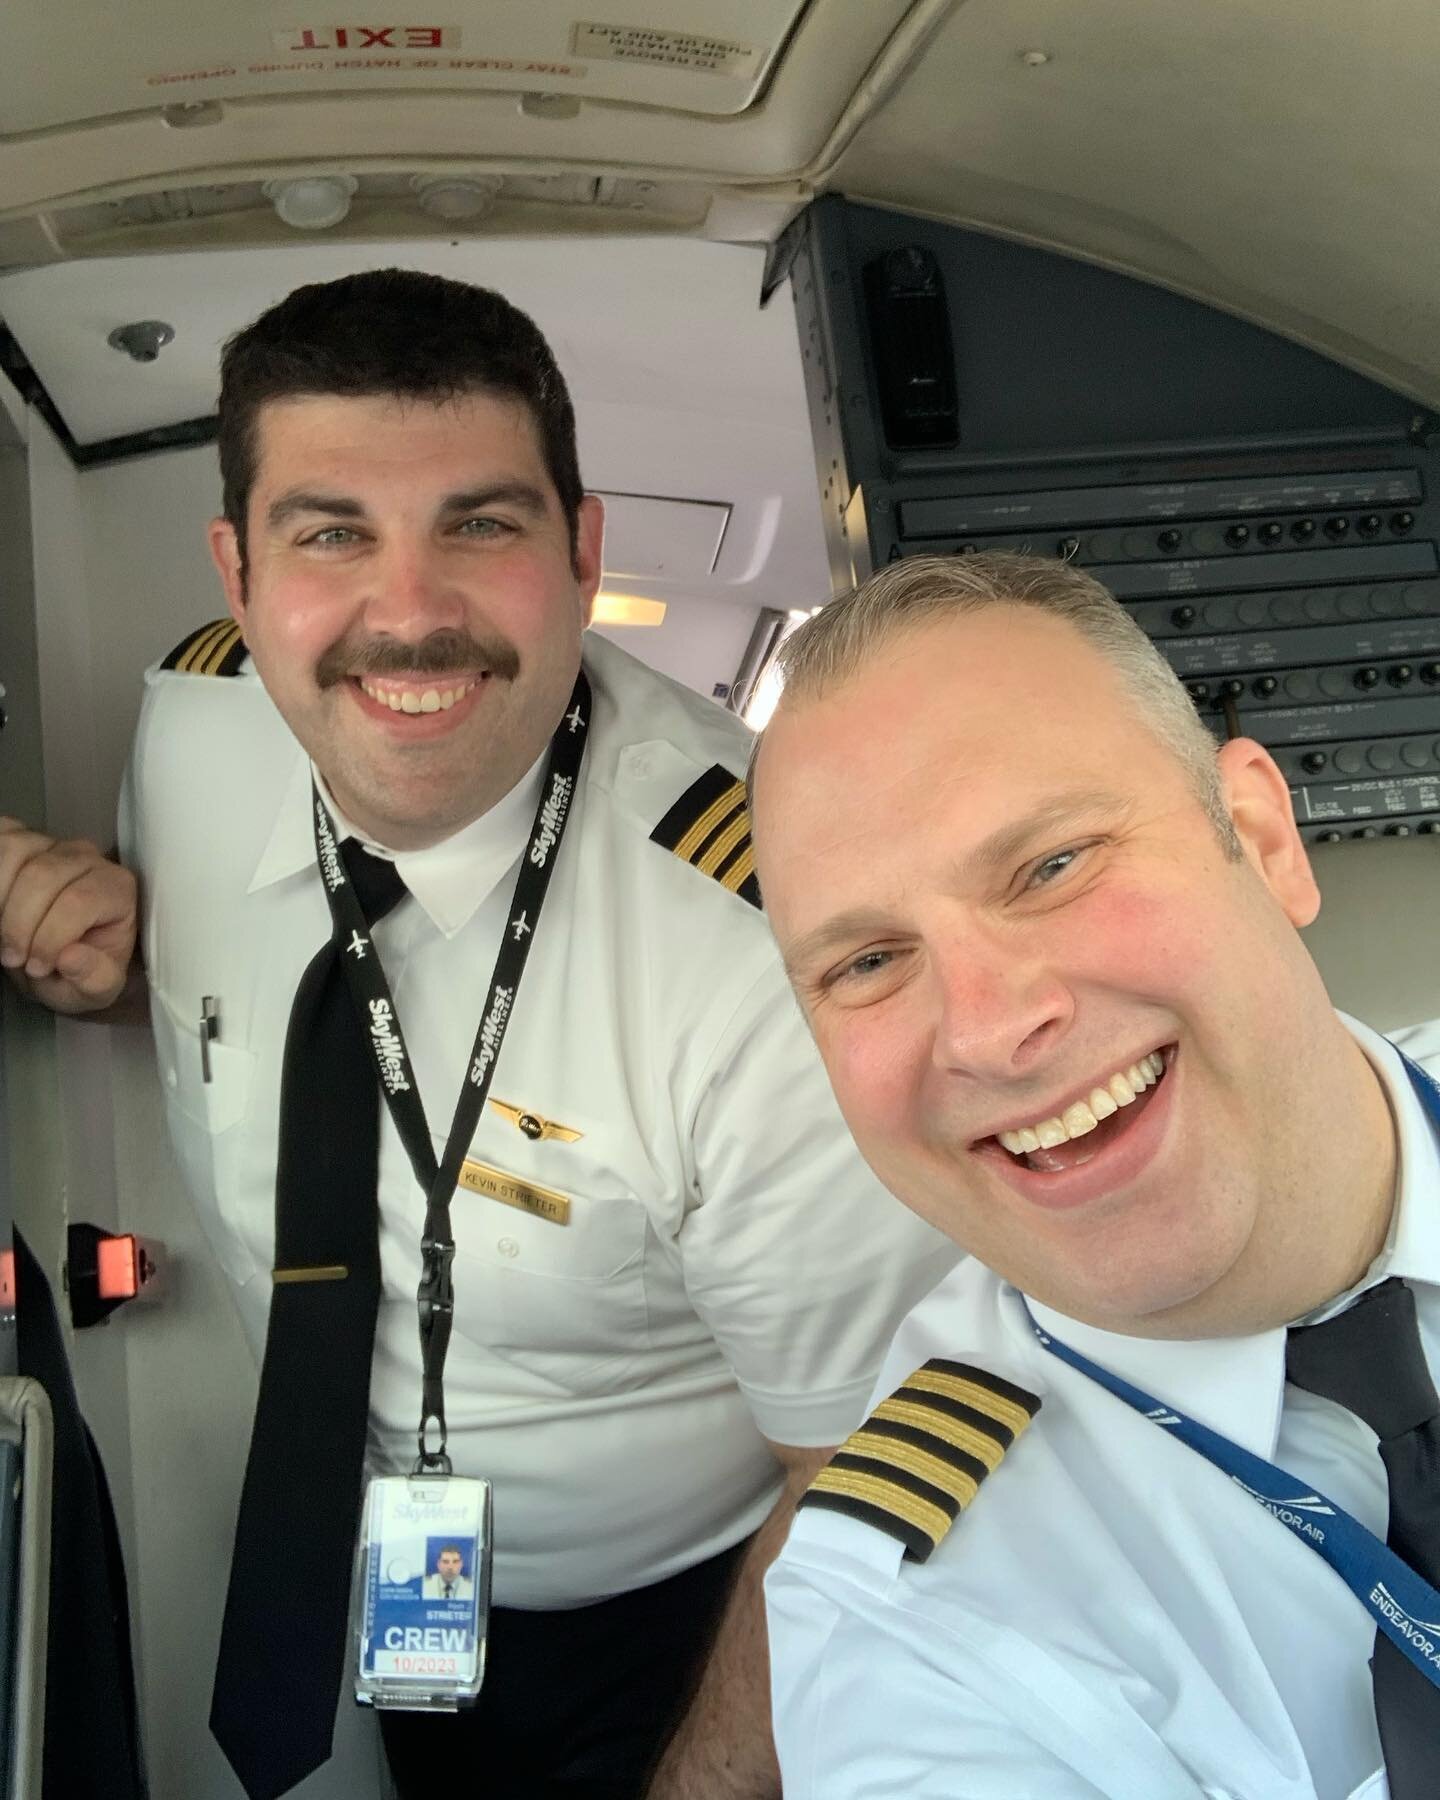 @pilotpanda62 was able to catch a ride to Traverse City from @pilotrob950 after a long week of work. The @letstalkflying  crew are busy flying passengers durning the busy spring break. #letstalkflying #letstalkflyingpodcast #kevinandrobrock #flyingto